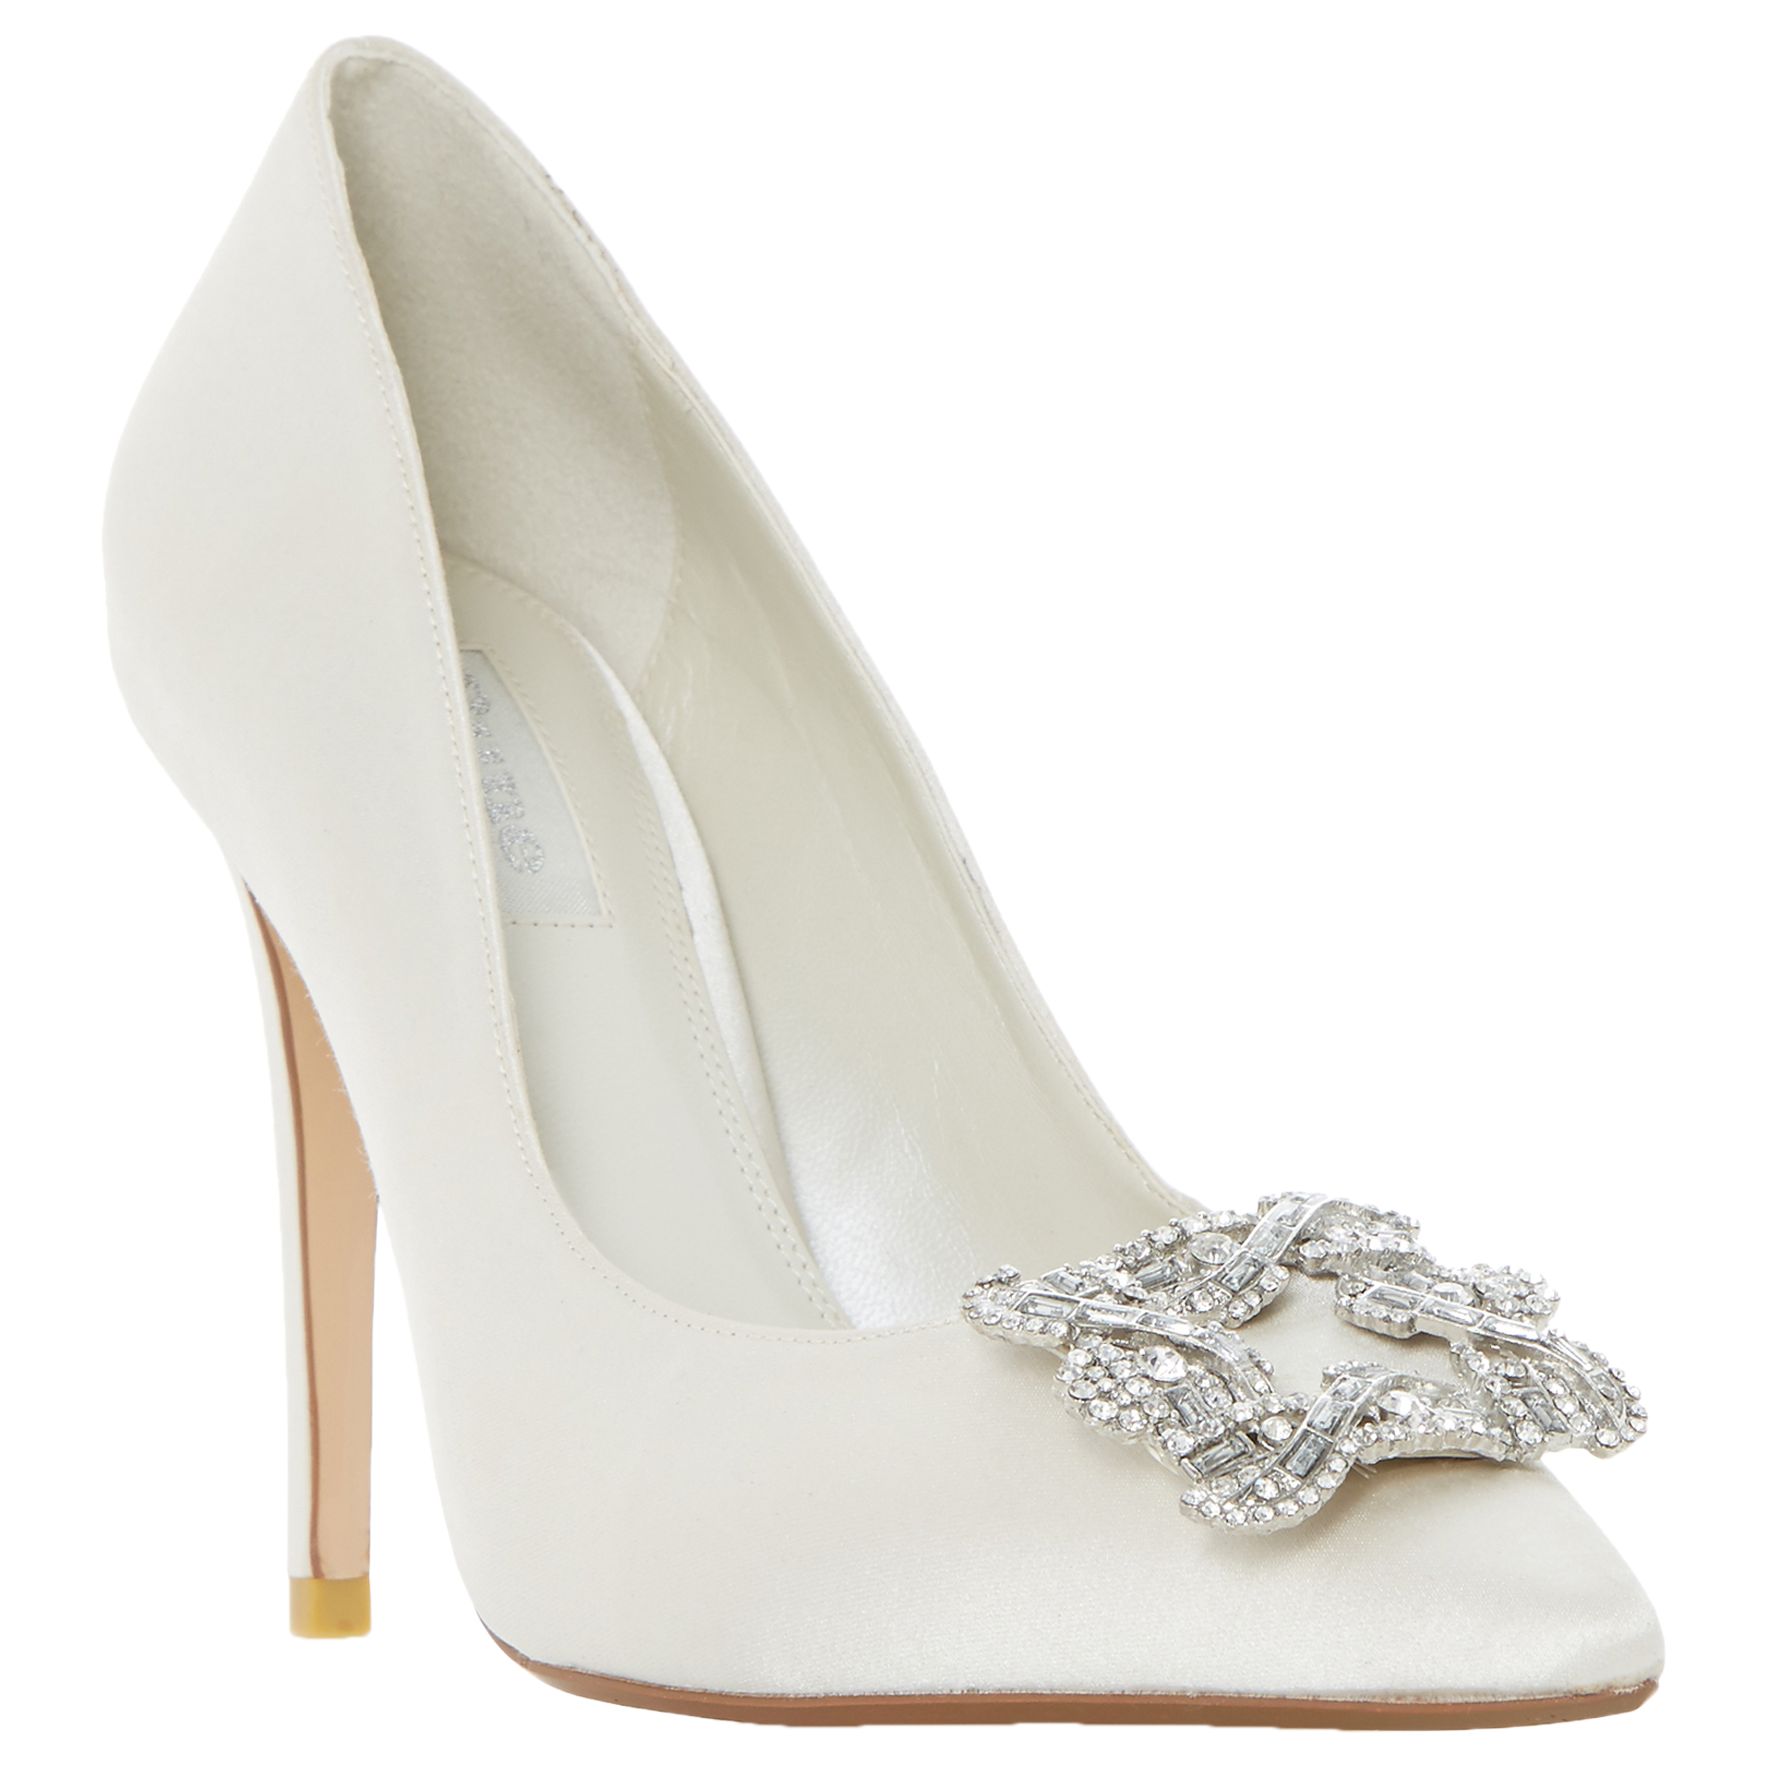 Dune Bridal Collection Breanna Jewel Stiletto Court Shoes, Ivory Satin